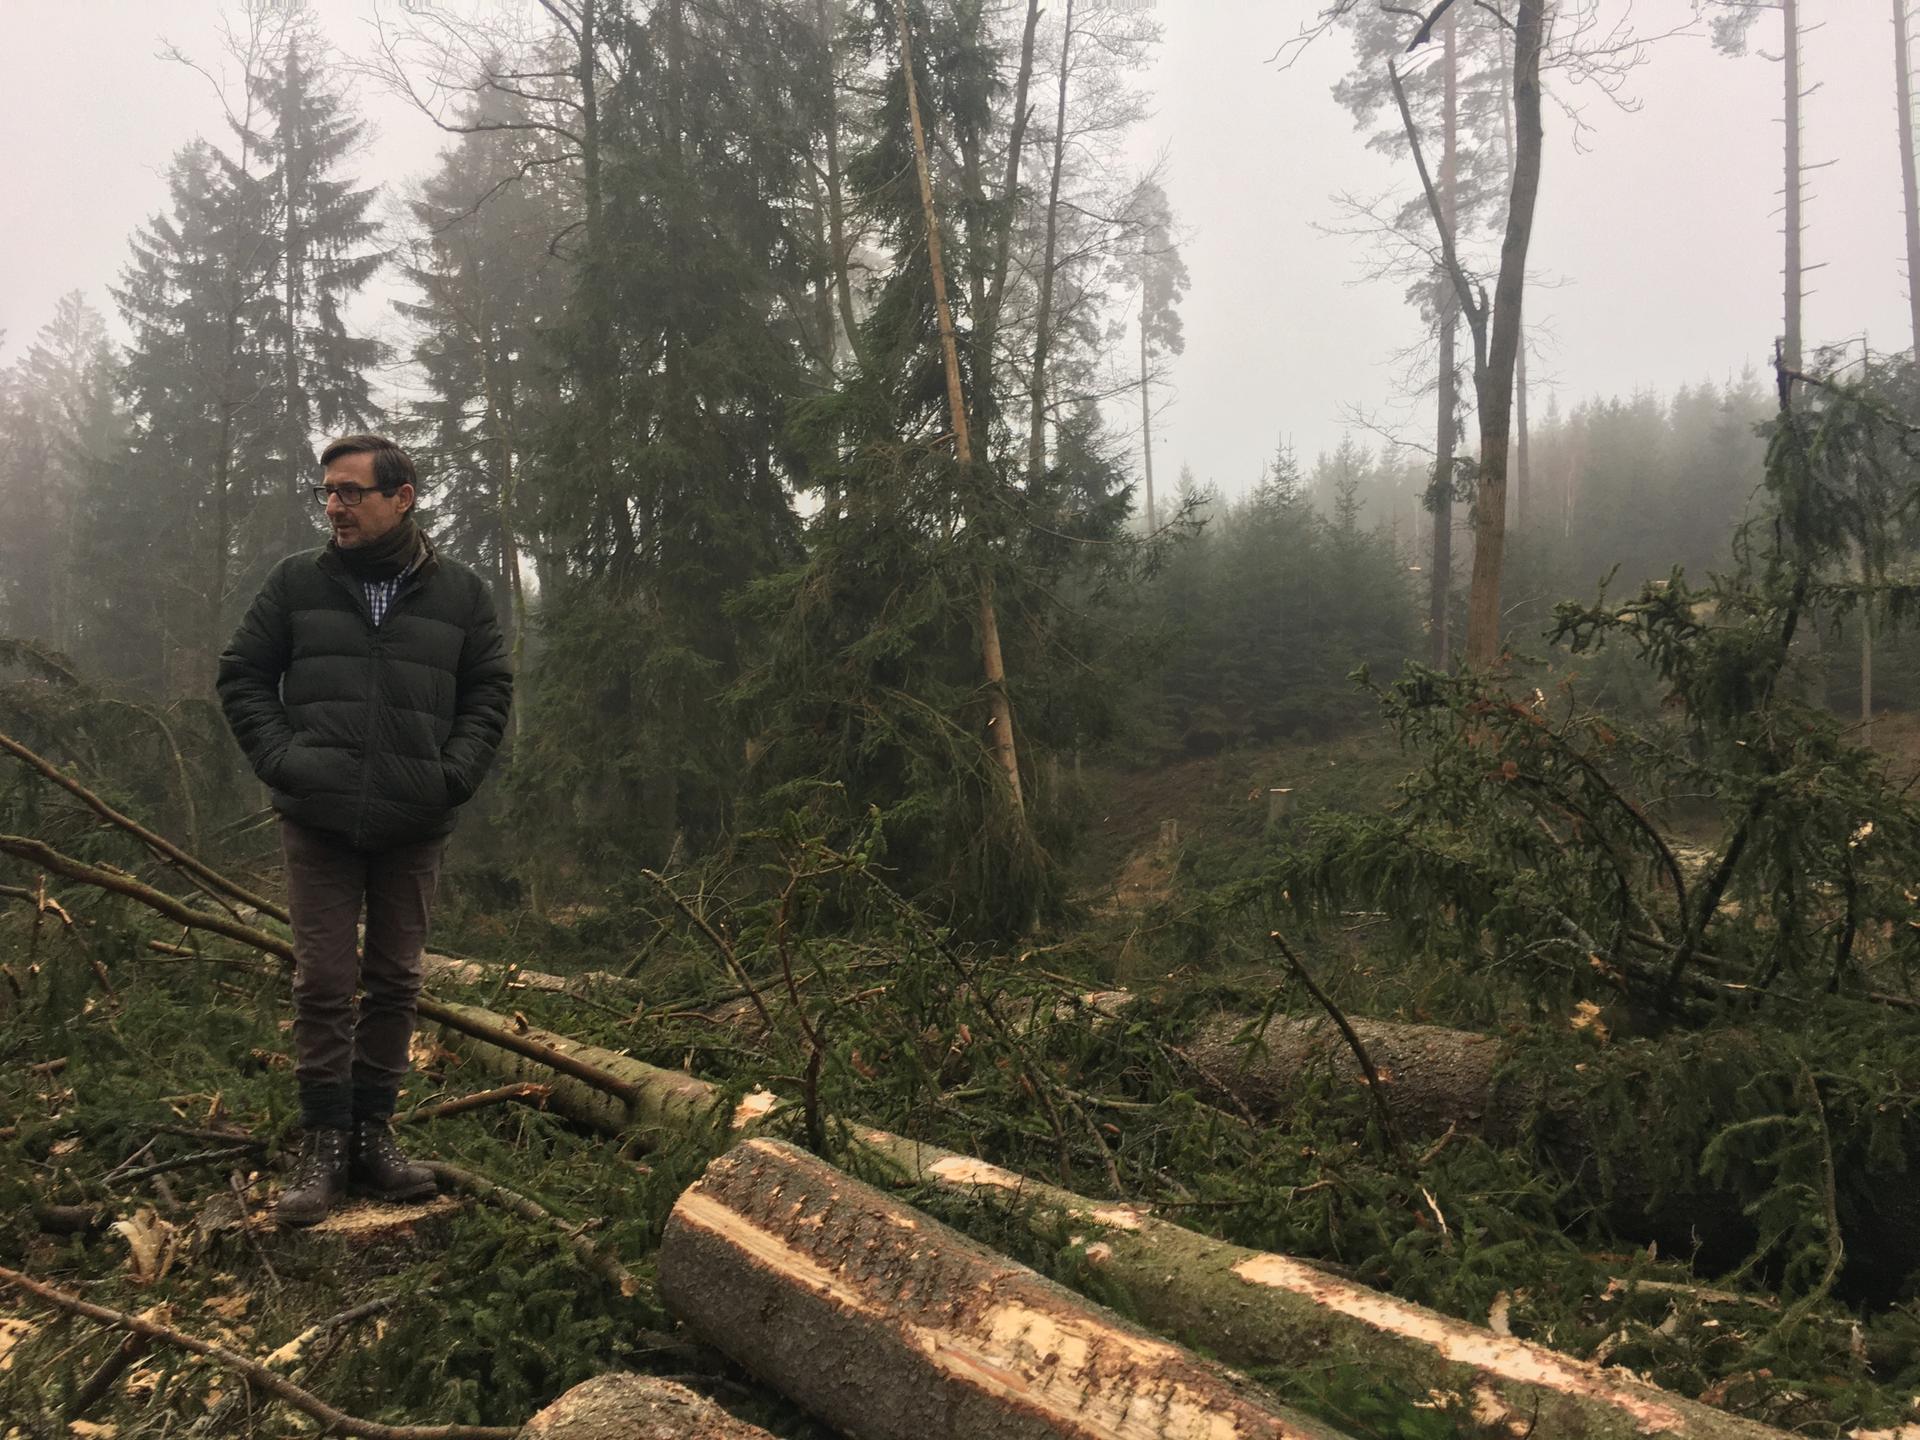 Forest manager Herbert Schmid says "close-to-nature" management practices make for more fire-resilient landscapes, but the practices are not new.